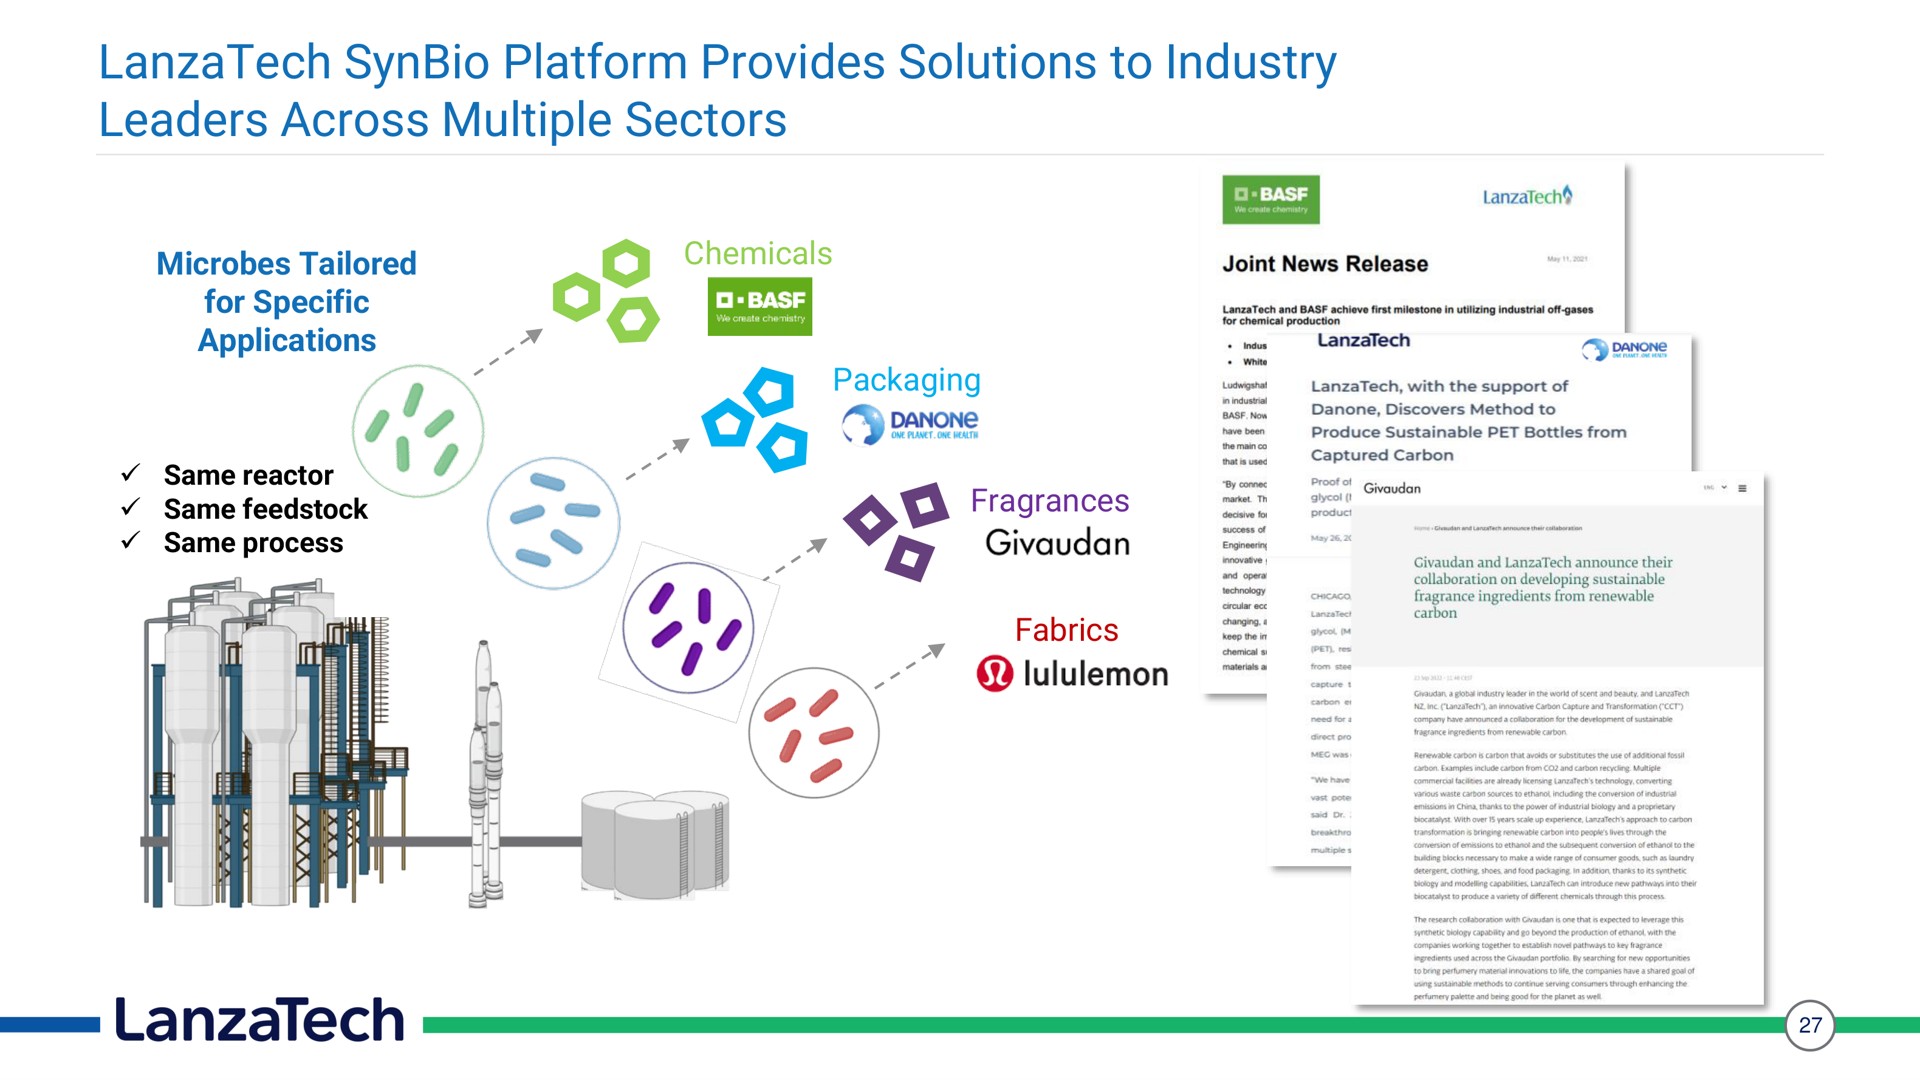 platform provides solutions to industry leaders across multiple sectors | LanzaTech